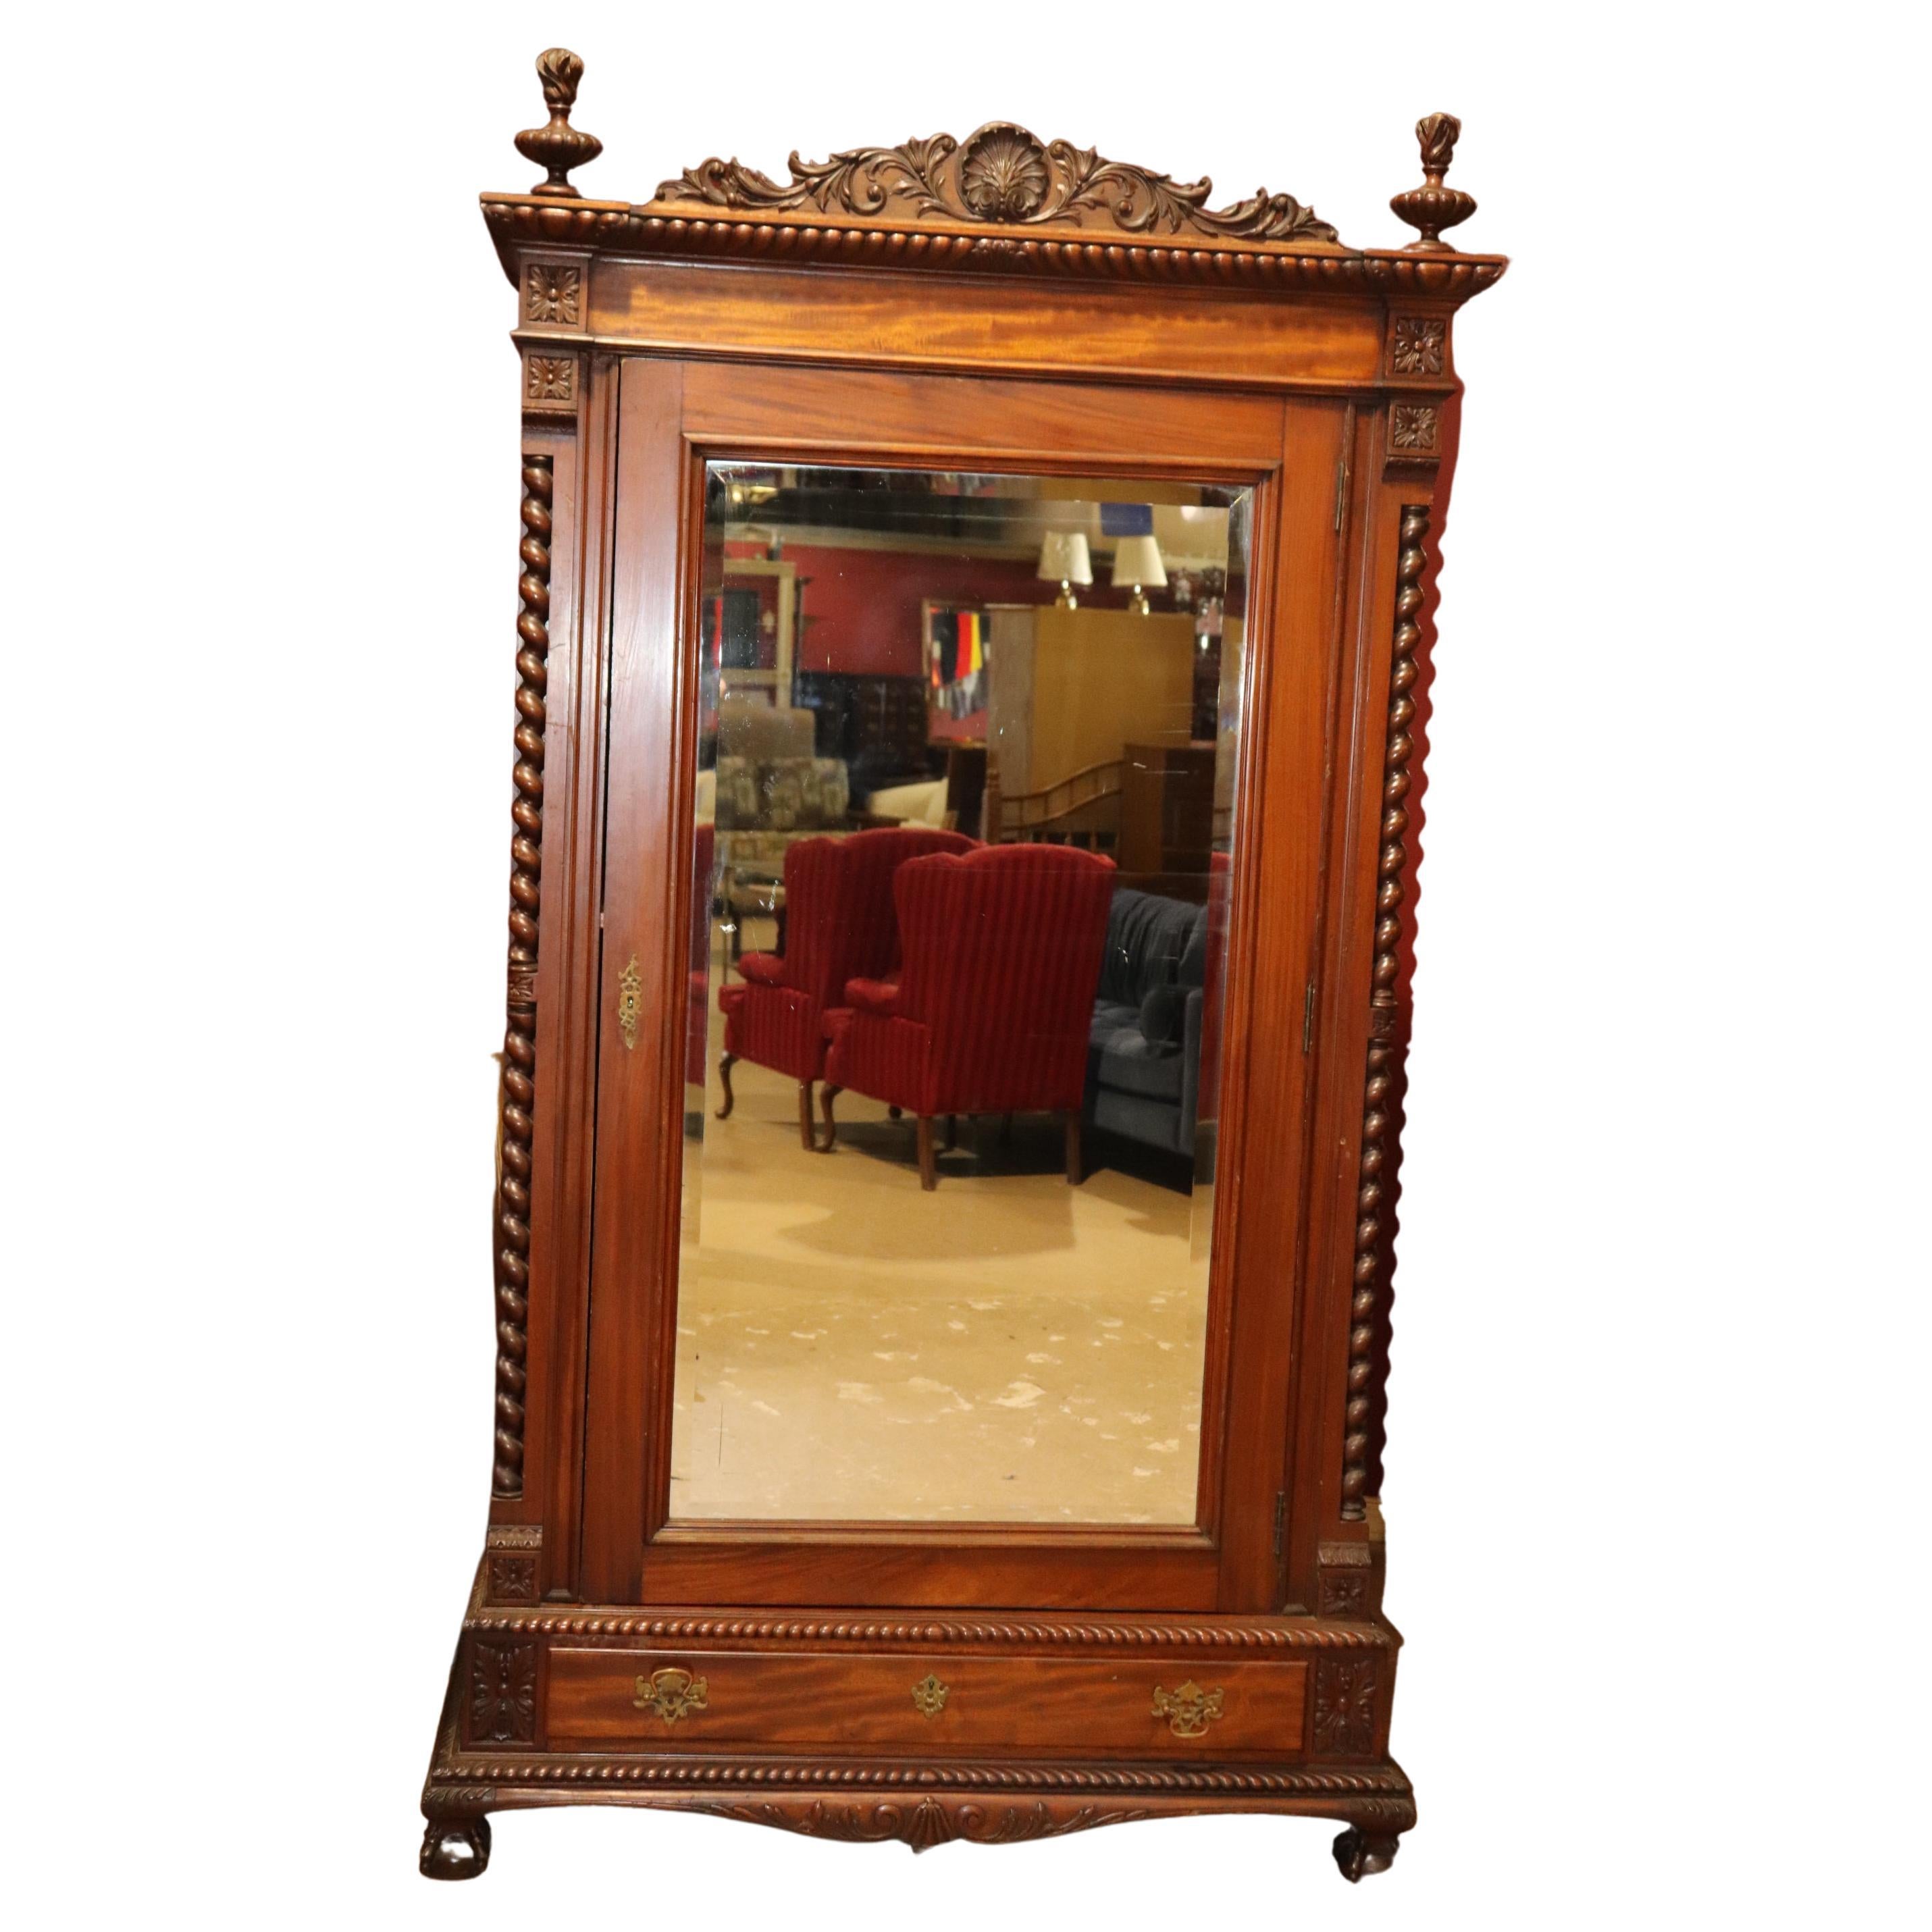 This is a superb carved mahogany Centennial era 1870s Chippendale armoire. The armoire is made during the 1870s era in Philadelphia and made to look like an earlier 1770s era armoire. The armoire measures 24 deep x 55 wide x 97 tall.